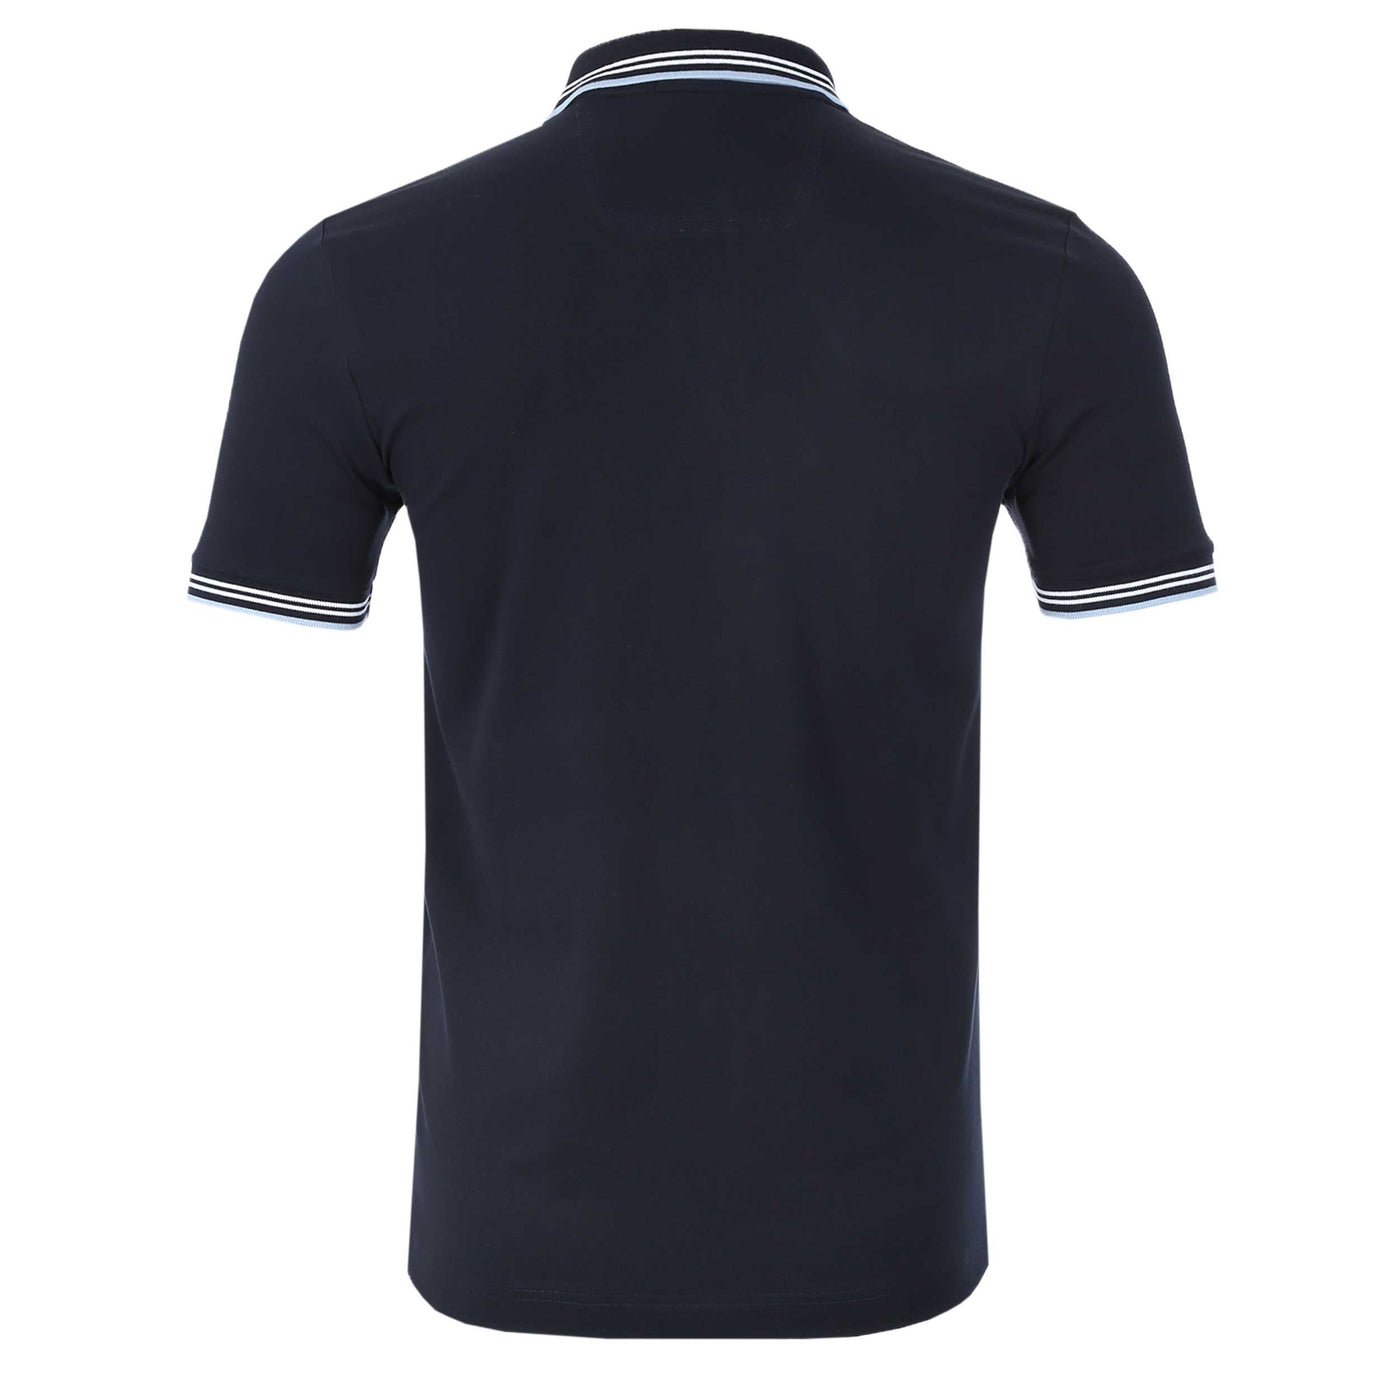 BOSS Paul Curved Polo Shirt in Dark Blue back